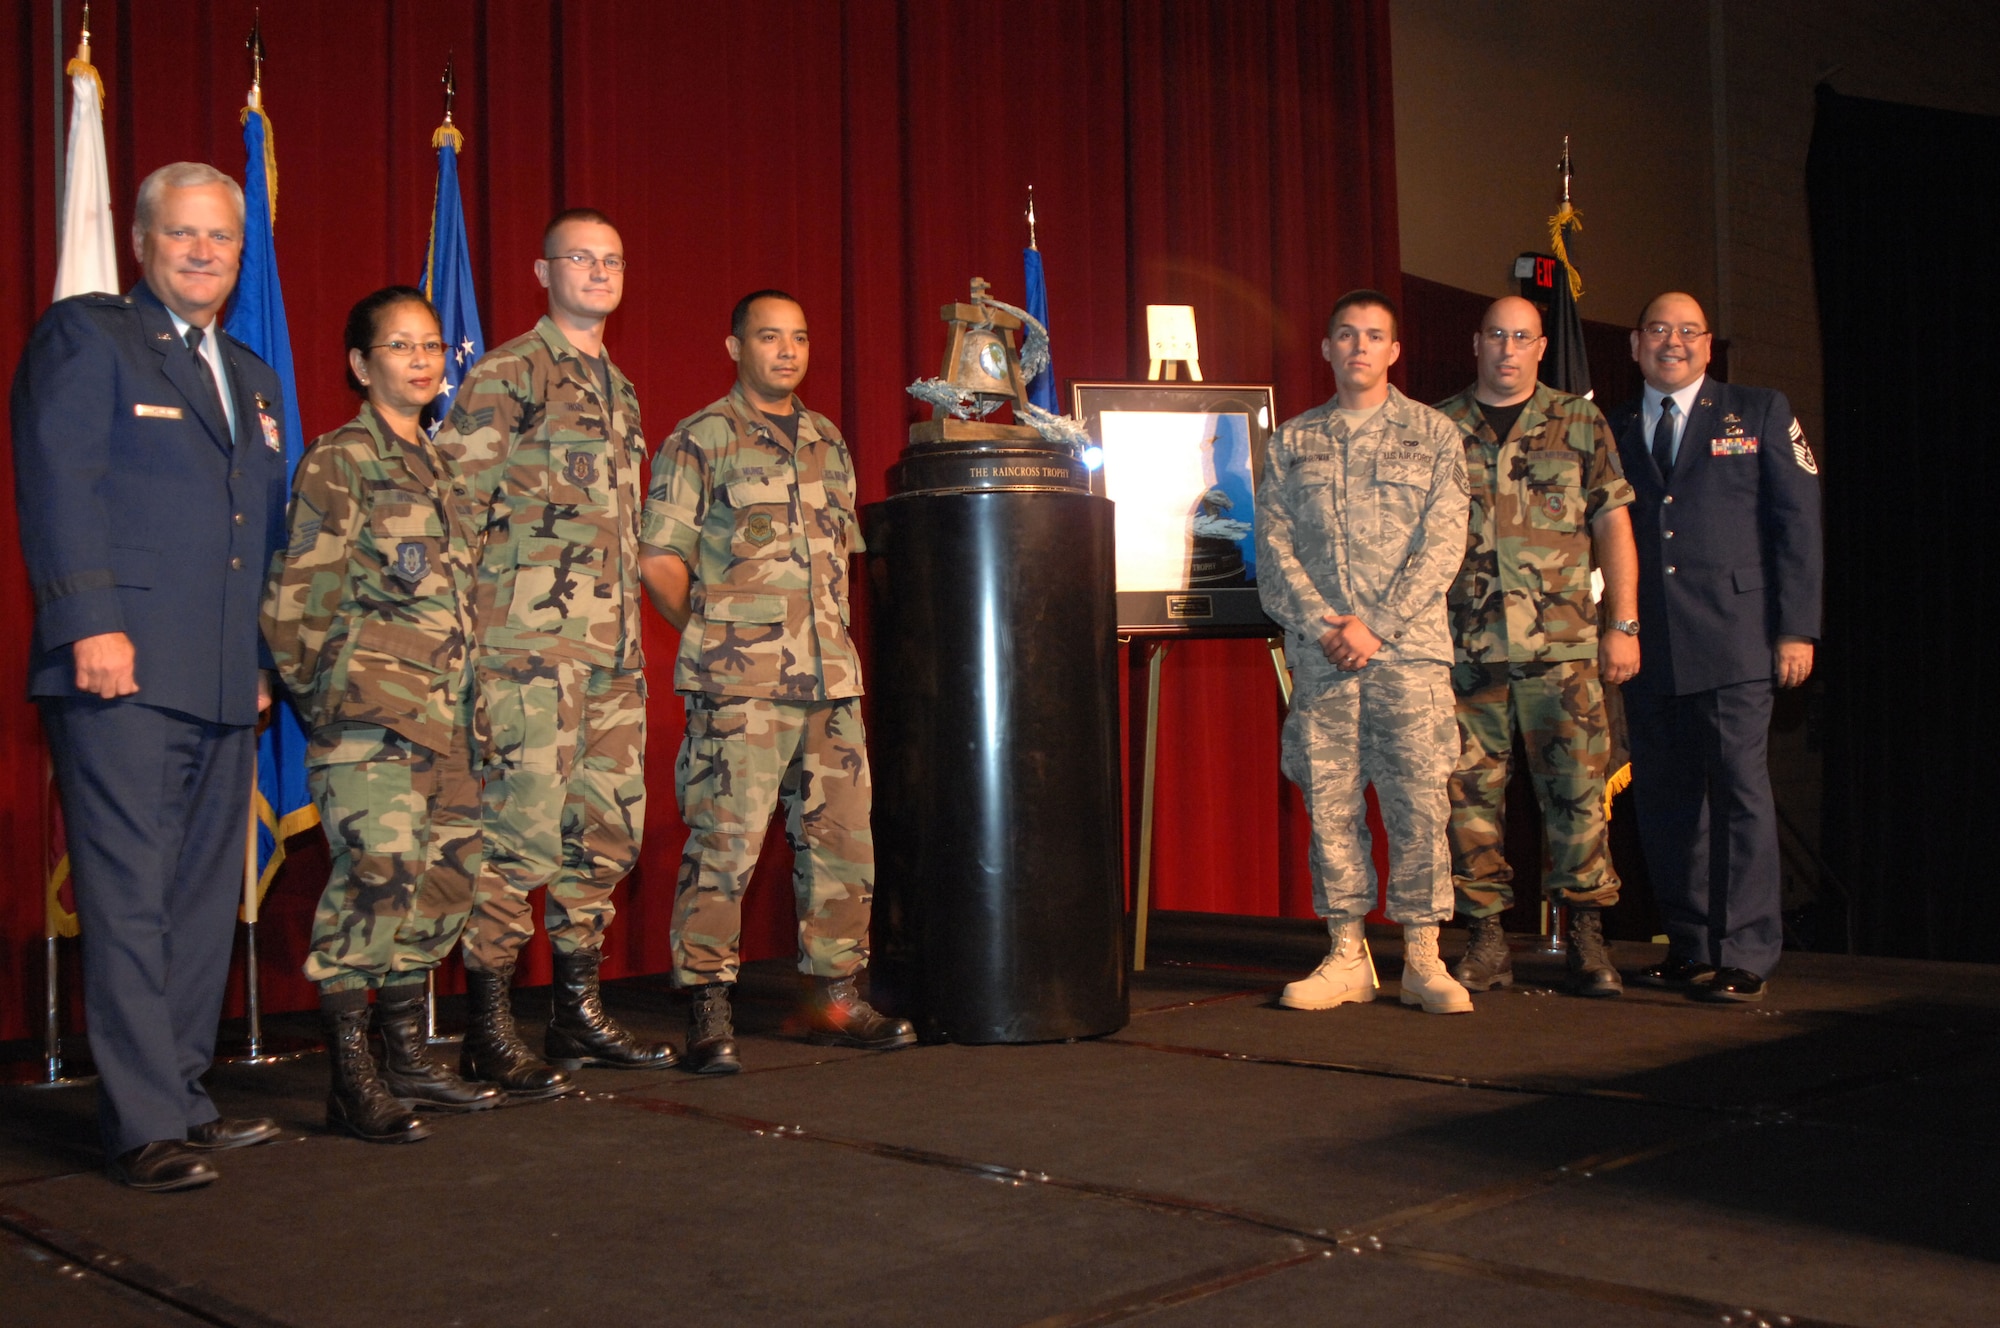 Brig. Gen. James Melin, left, Commander, 452nd Air Mobility Wing, March Air Reserve Base, Calif., and Chief Master Sgt. Agustin Huerta, 452nd AMW Command Chief, far right, pose with members of the 452nd Logistics Readiness Squadron with the Raincross Trophy after it was awarded to the 452nd AMW at the 11th Annual Raincross Trophy Dinner held July 23, 2009, at the Riverside Convention Center, Riverside, Calif. The dinner is hosted by the Greater Riverside Chambers of Commerce Military Affairs Committee to honor and recognize the 11 wings and two groups in 4th Air Force.  (U.S. Air Force photo/Senior Master Sgt. Kim Allain)  (released)